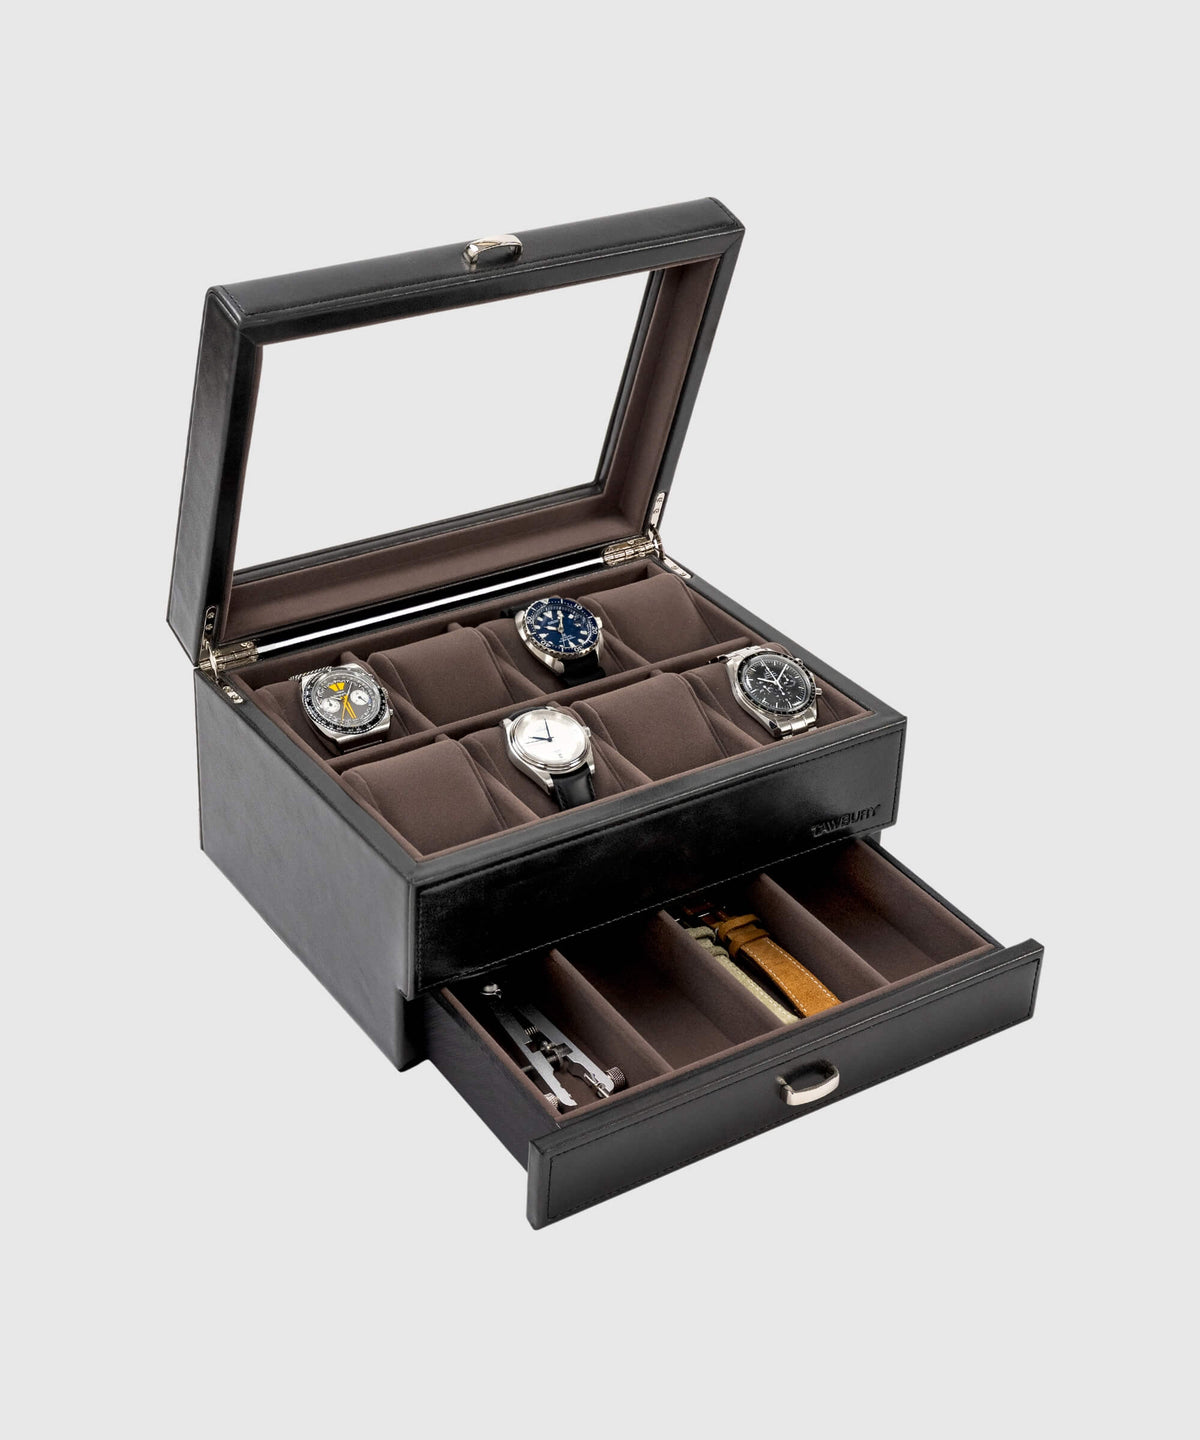 A TAWBURY Bayswater 8 Slot Watch Box with Drawer - Black, made with vegan leather, housing multiple watches.